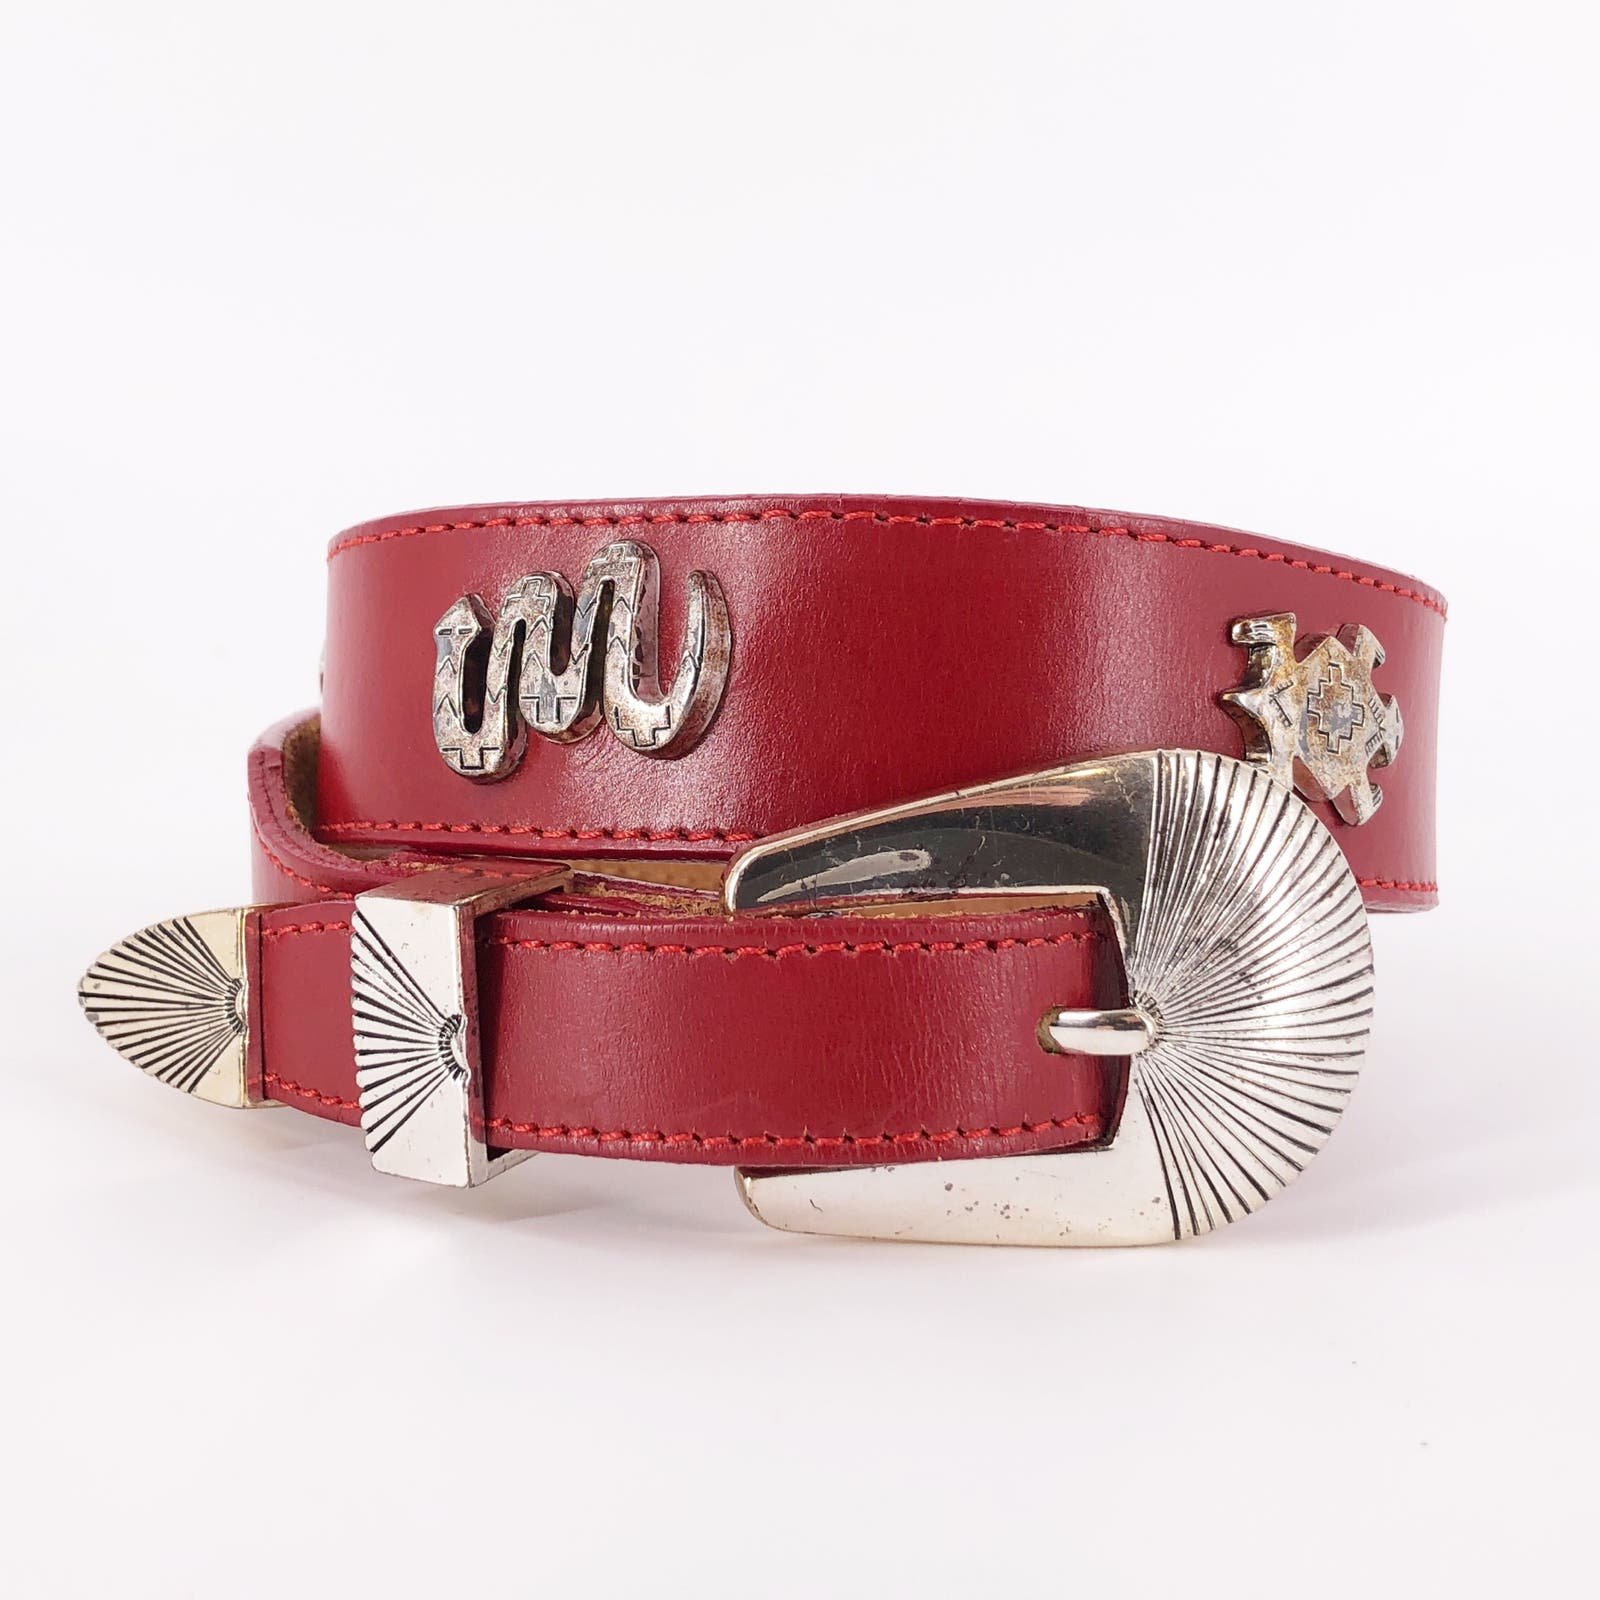 90s animal concho red leather western belt 1990s vintage Silver Creek 9dhejAea8